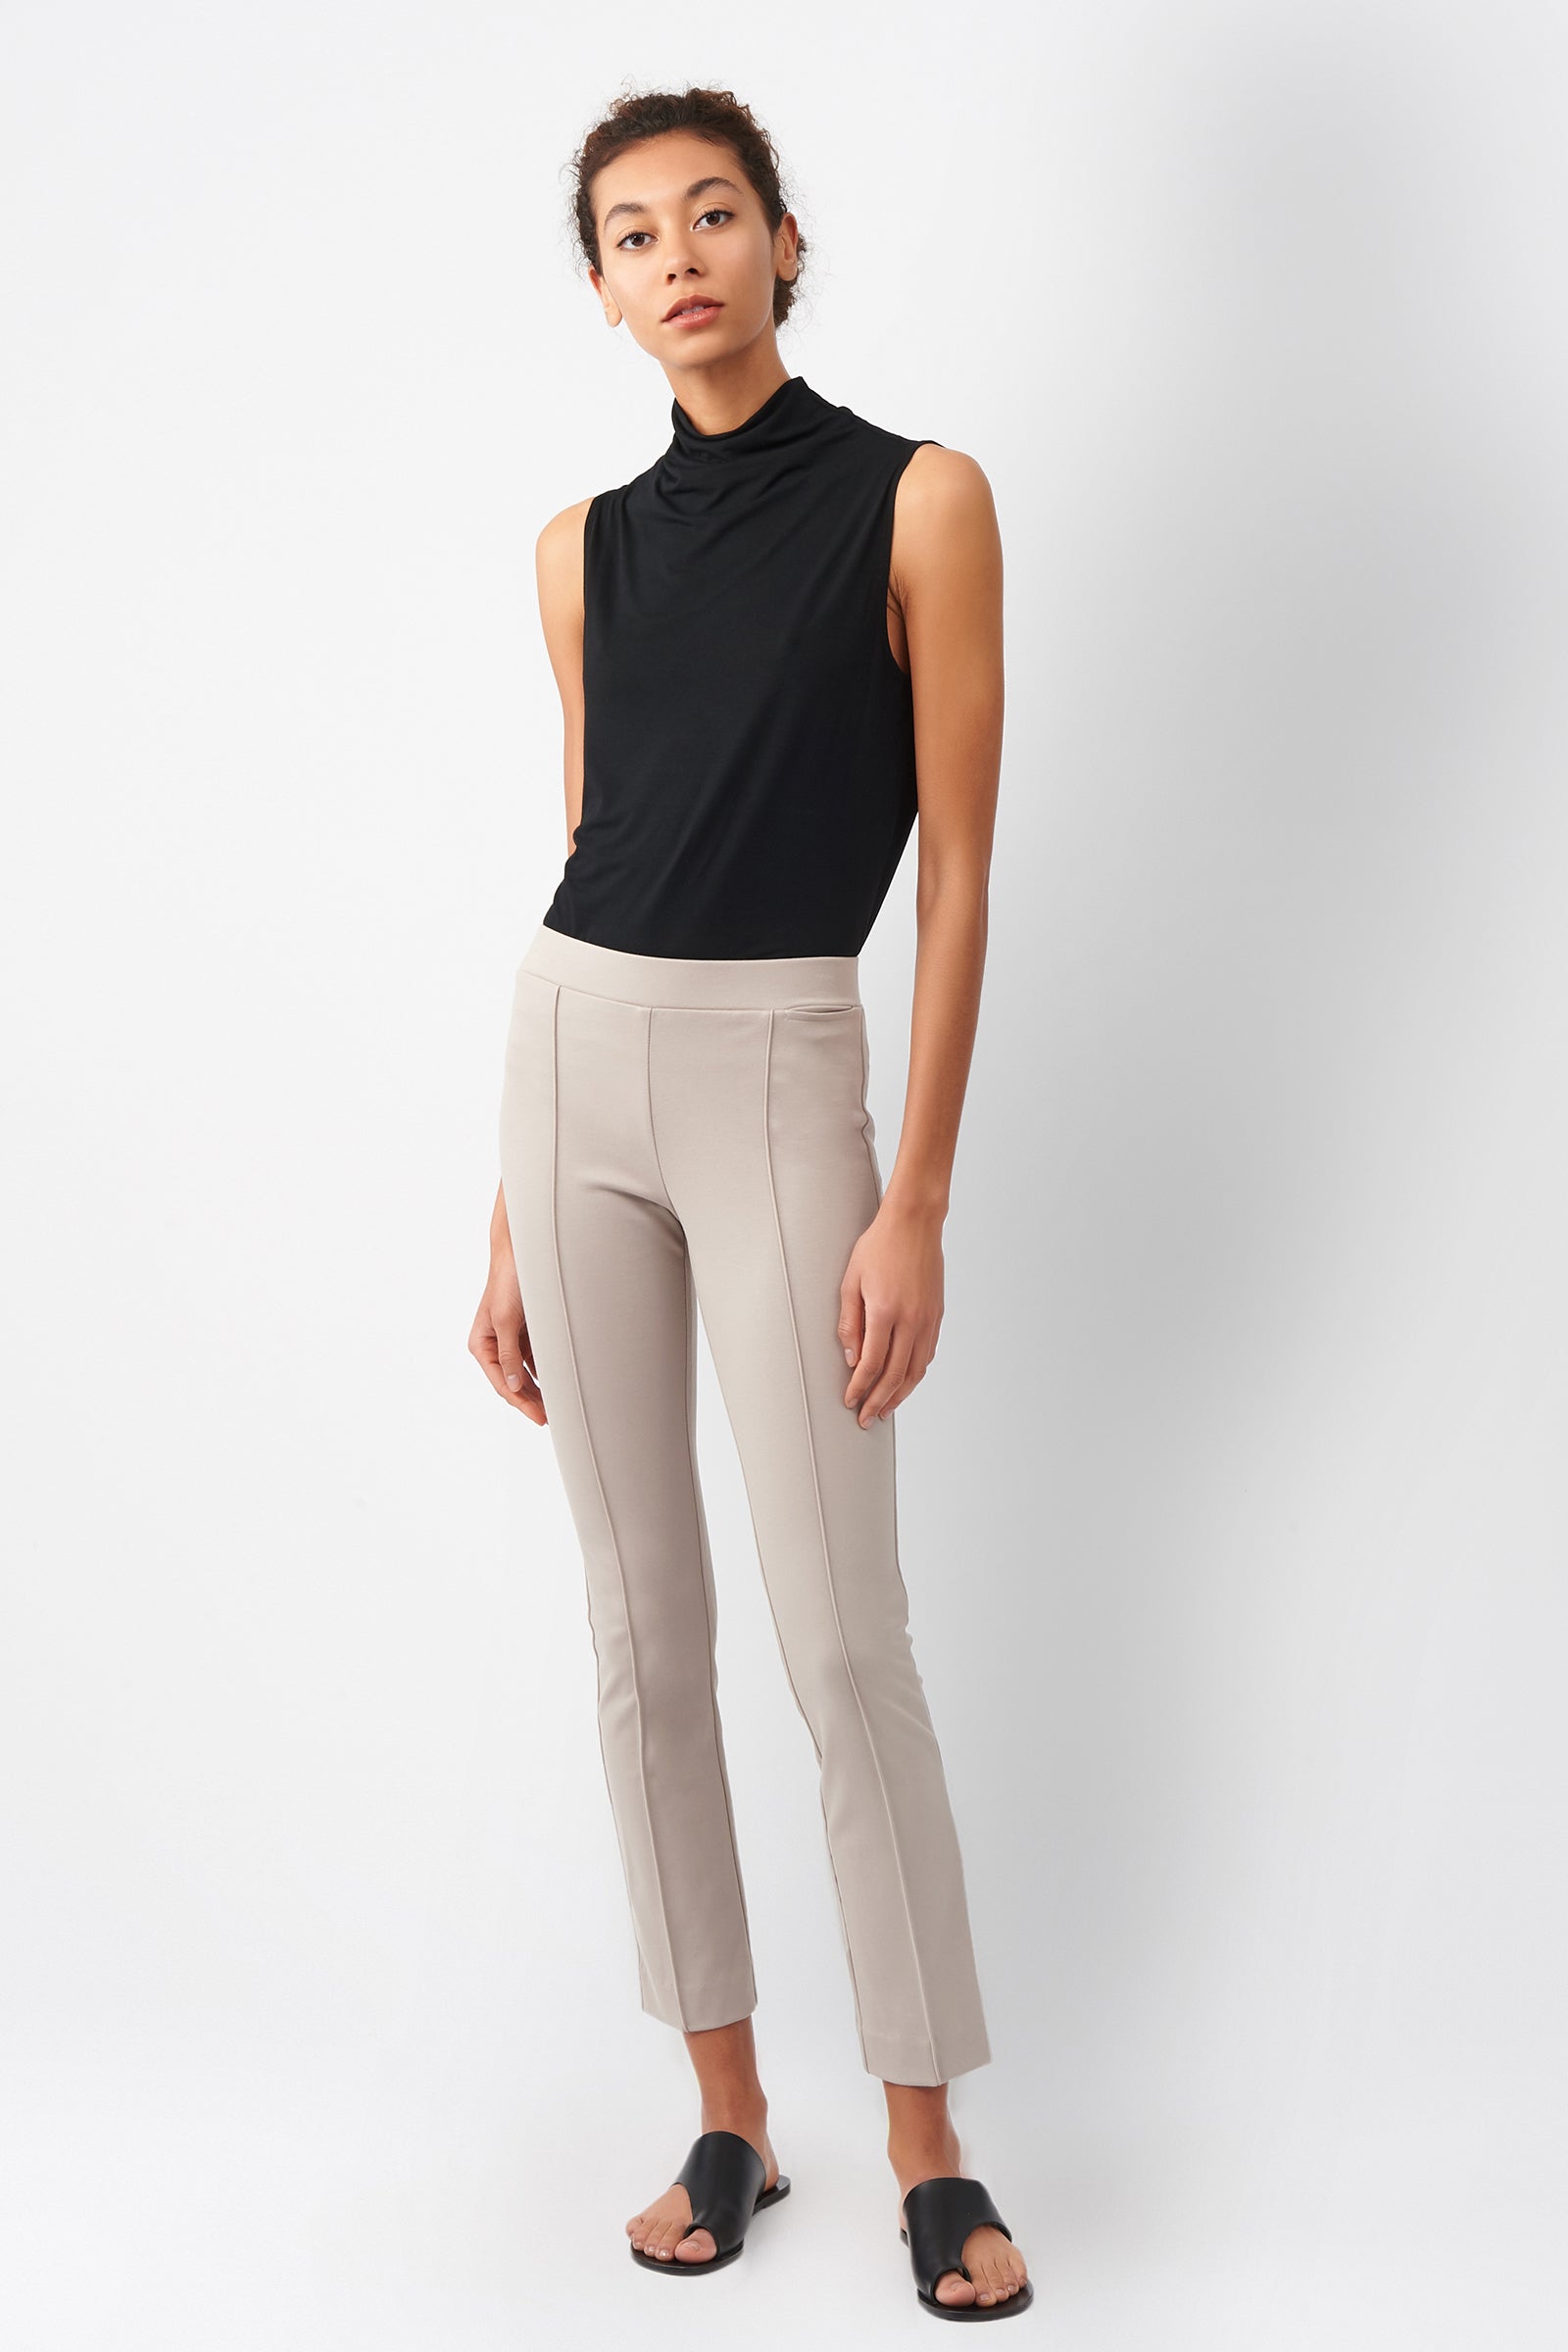 Kal Rieman Pintuck Ponte Ankle Pant in Taupe on Model Front View